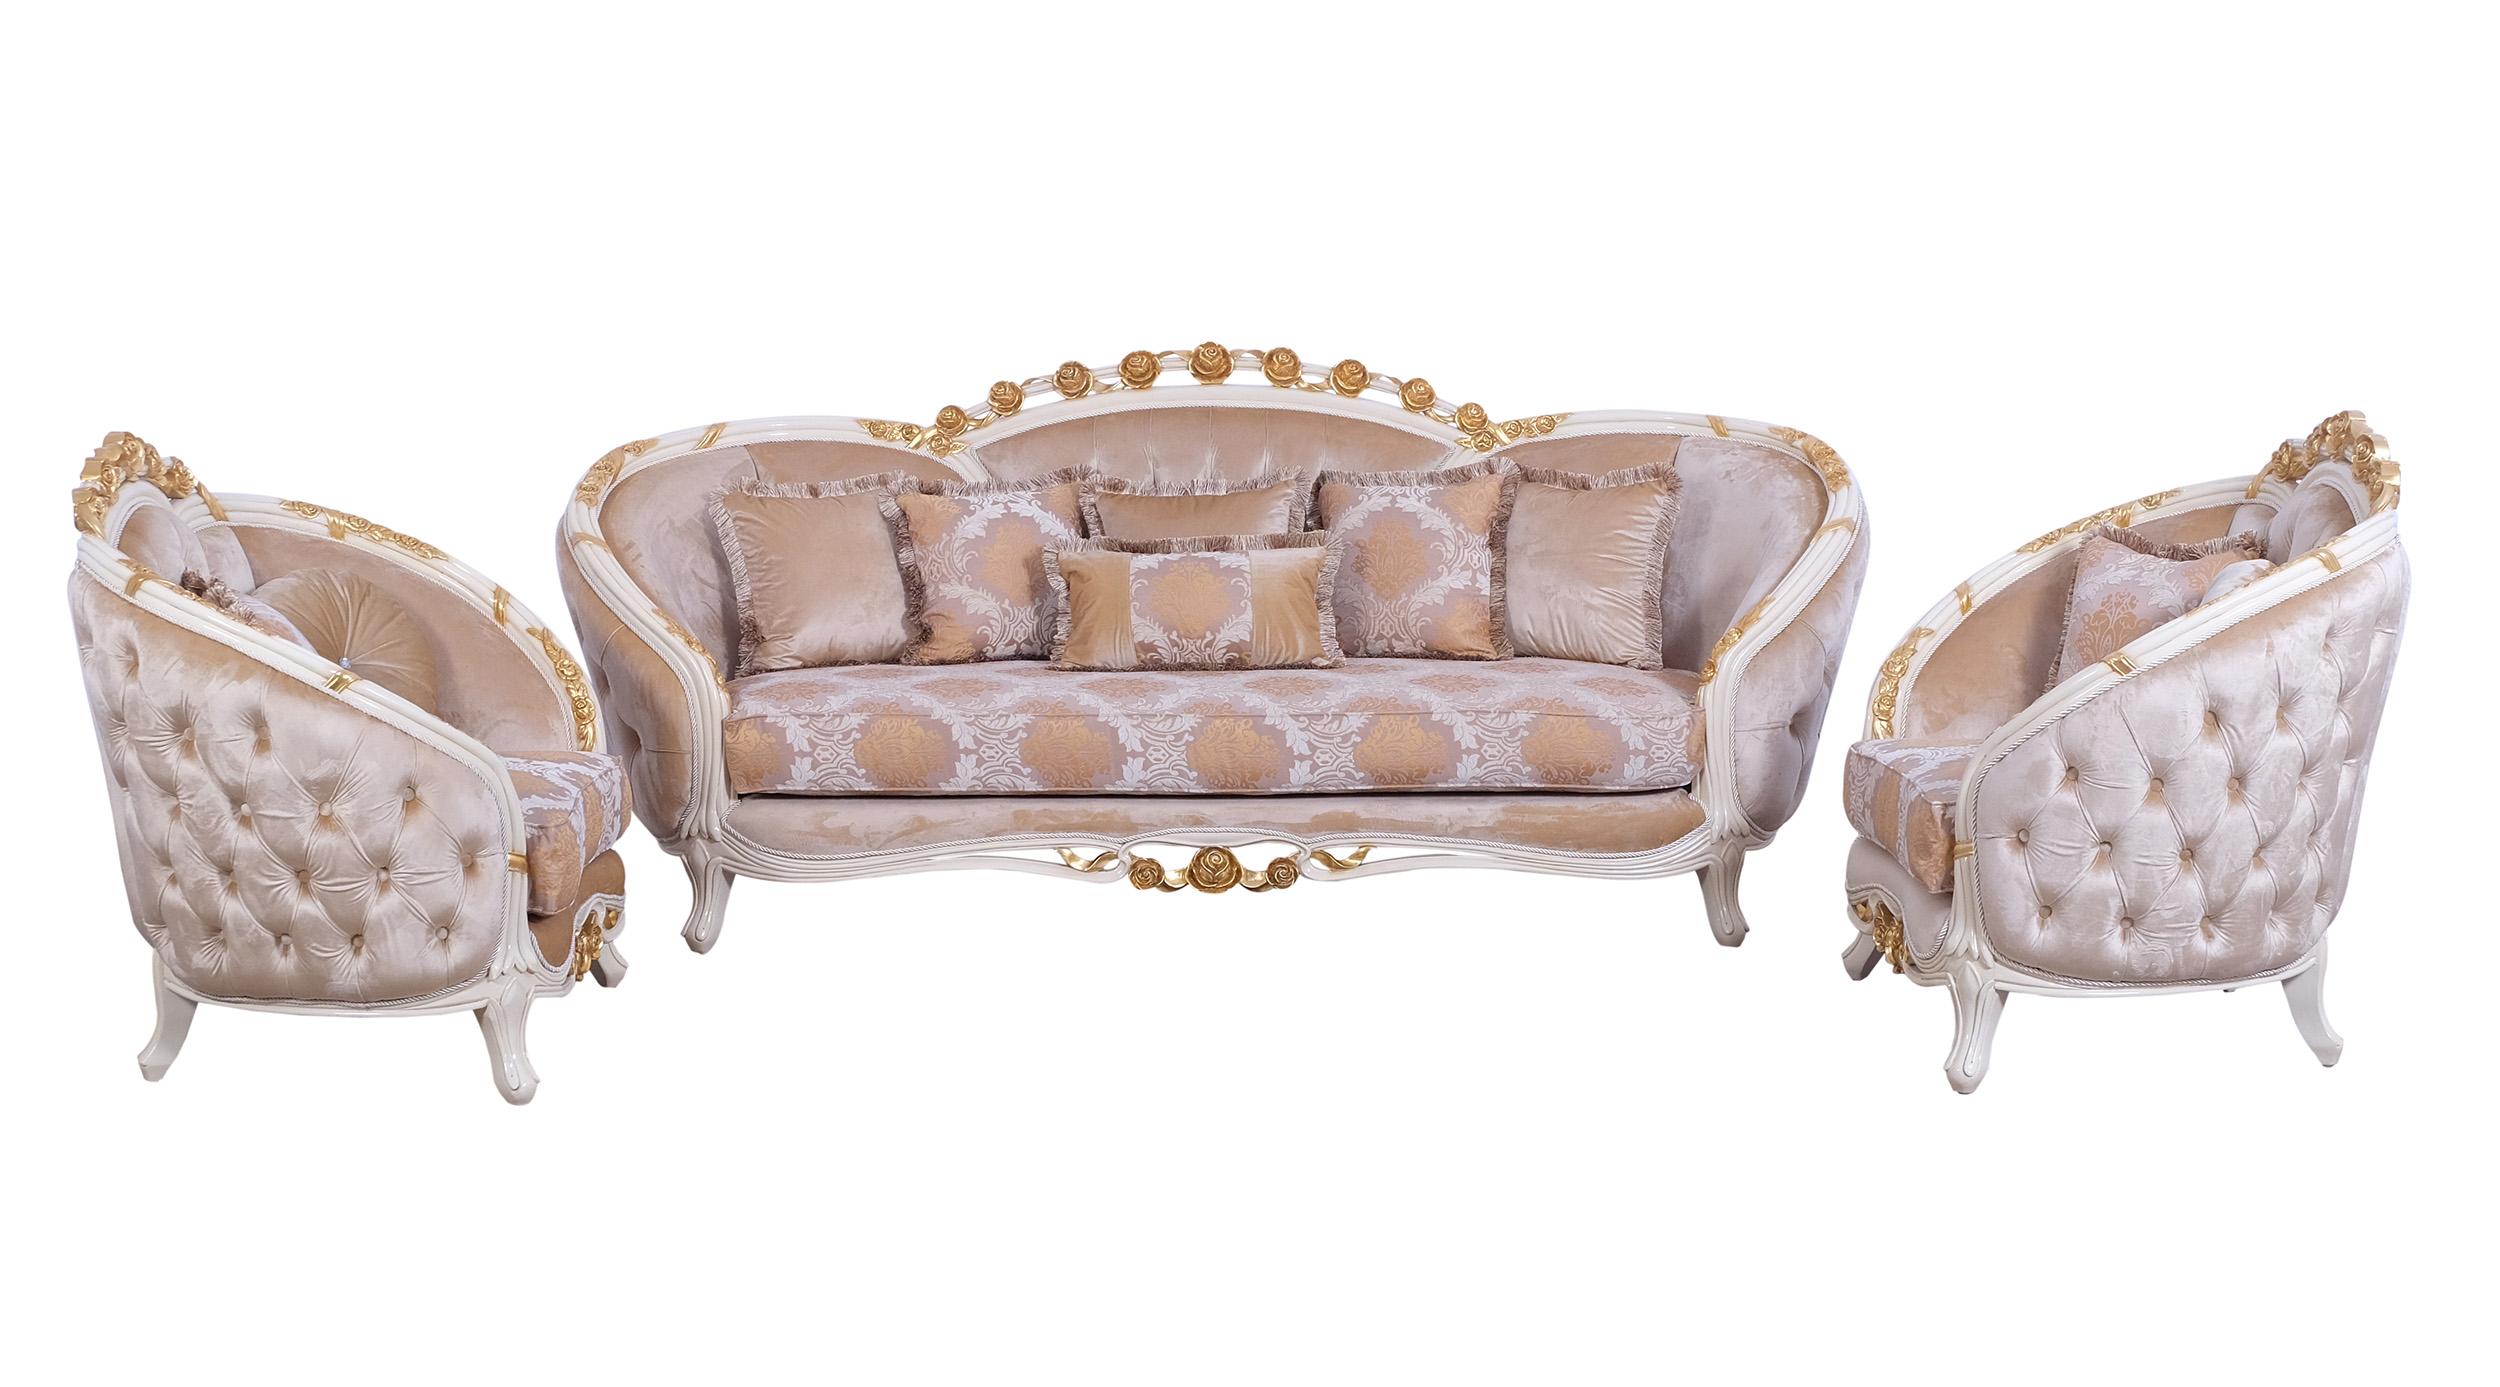 Classic, Traditional Sofa Set VALENTINE 45010-Set-3 in Gold, Beige Fabric